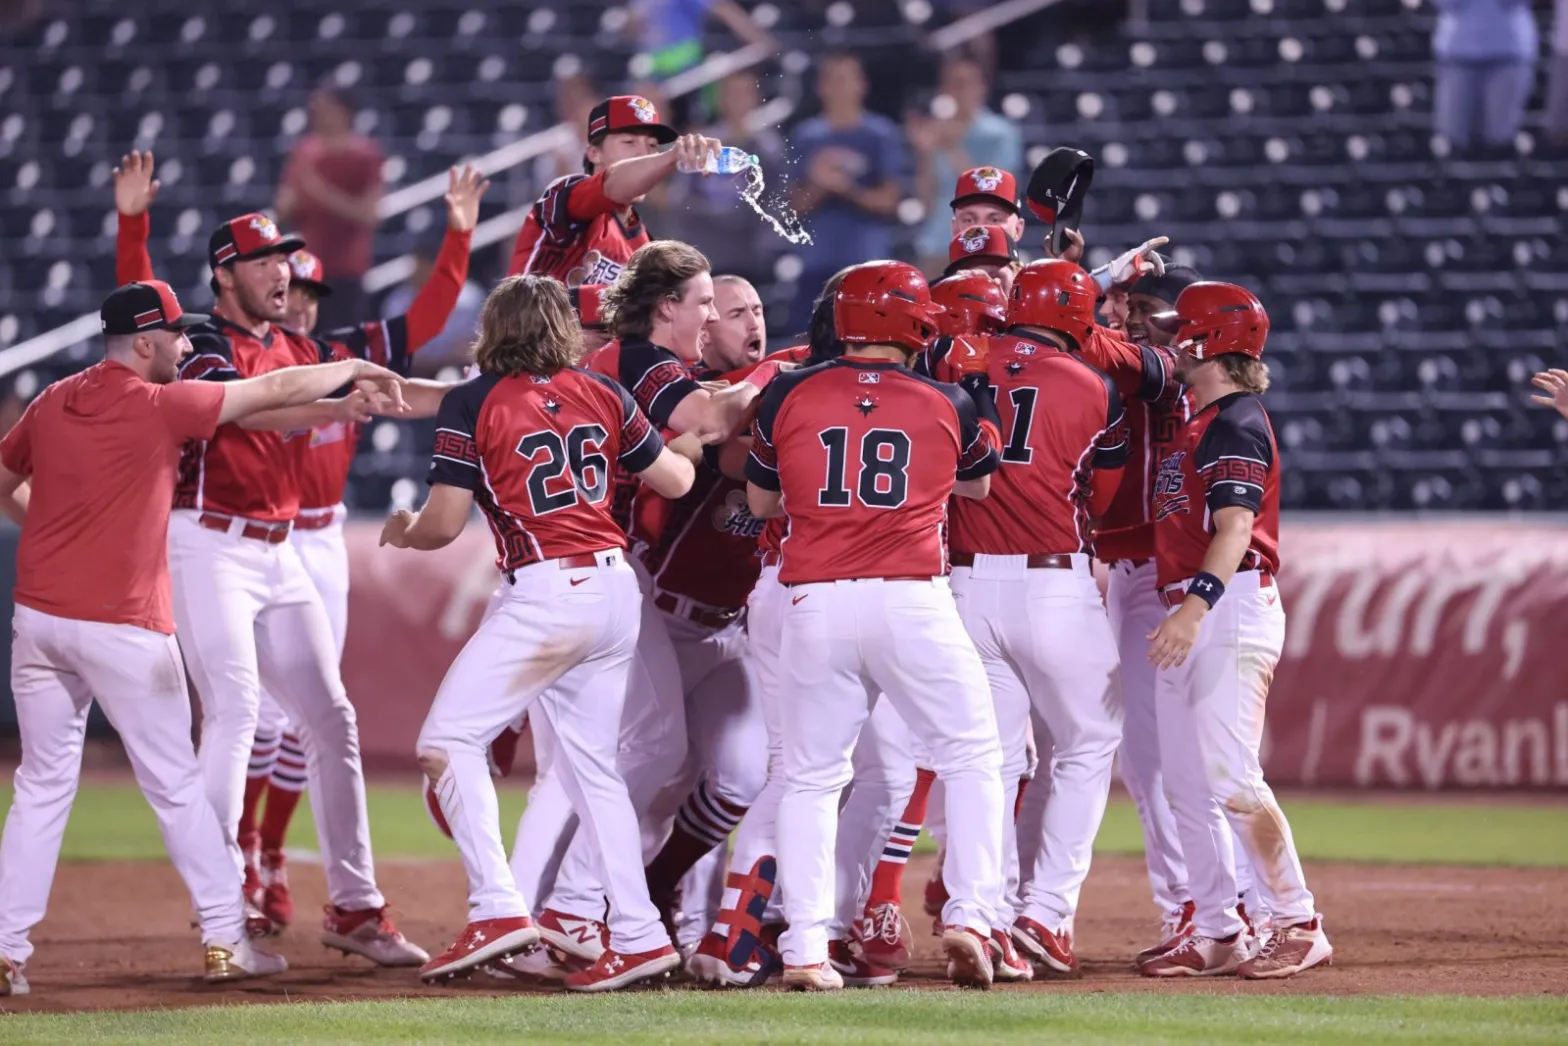 The Springfield Cardinals celebrate on the field after a walk-off win at Hammons Field